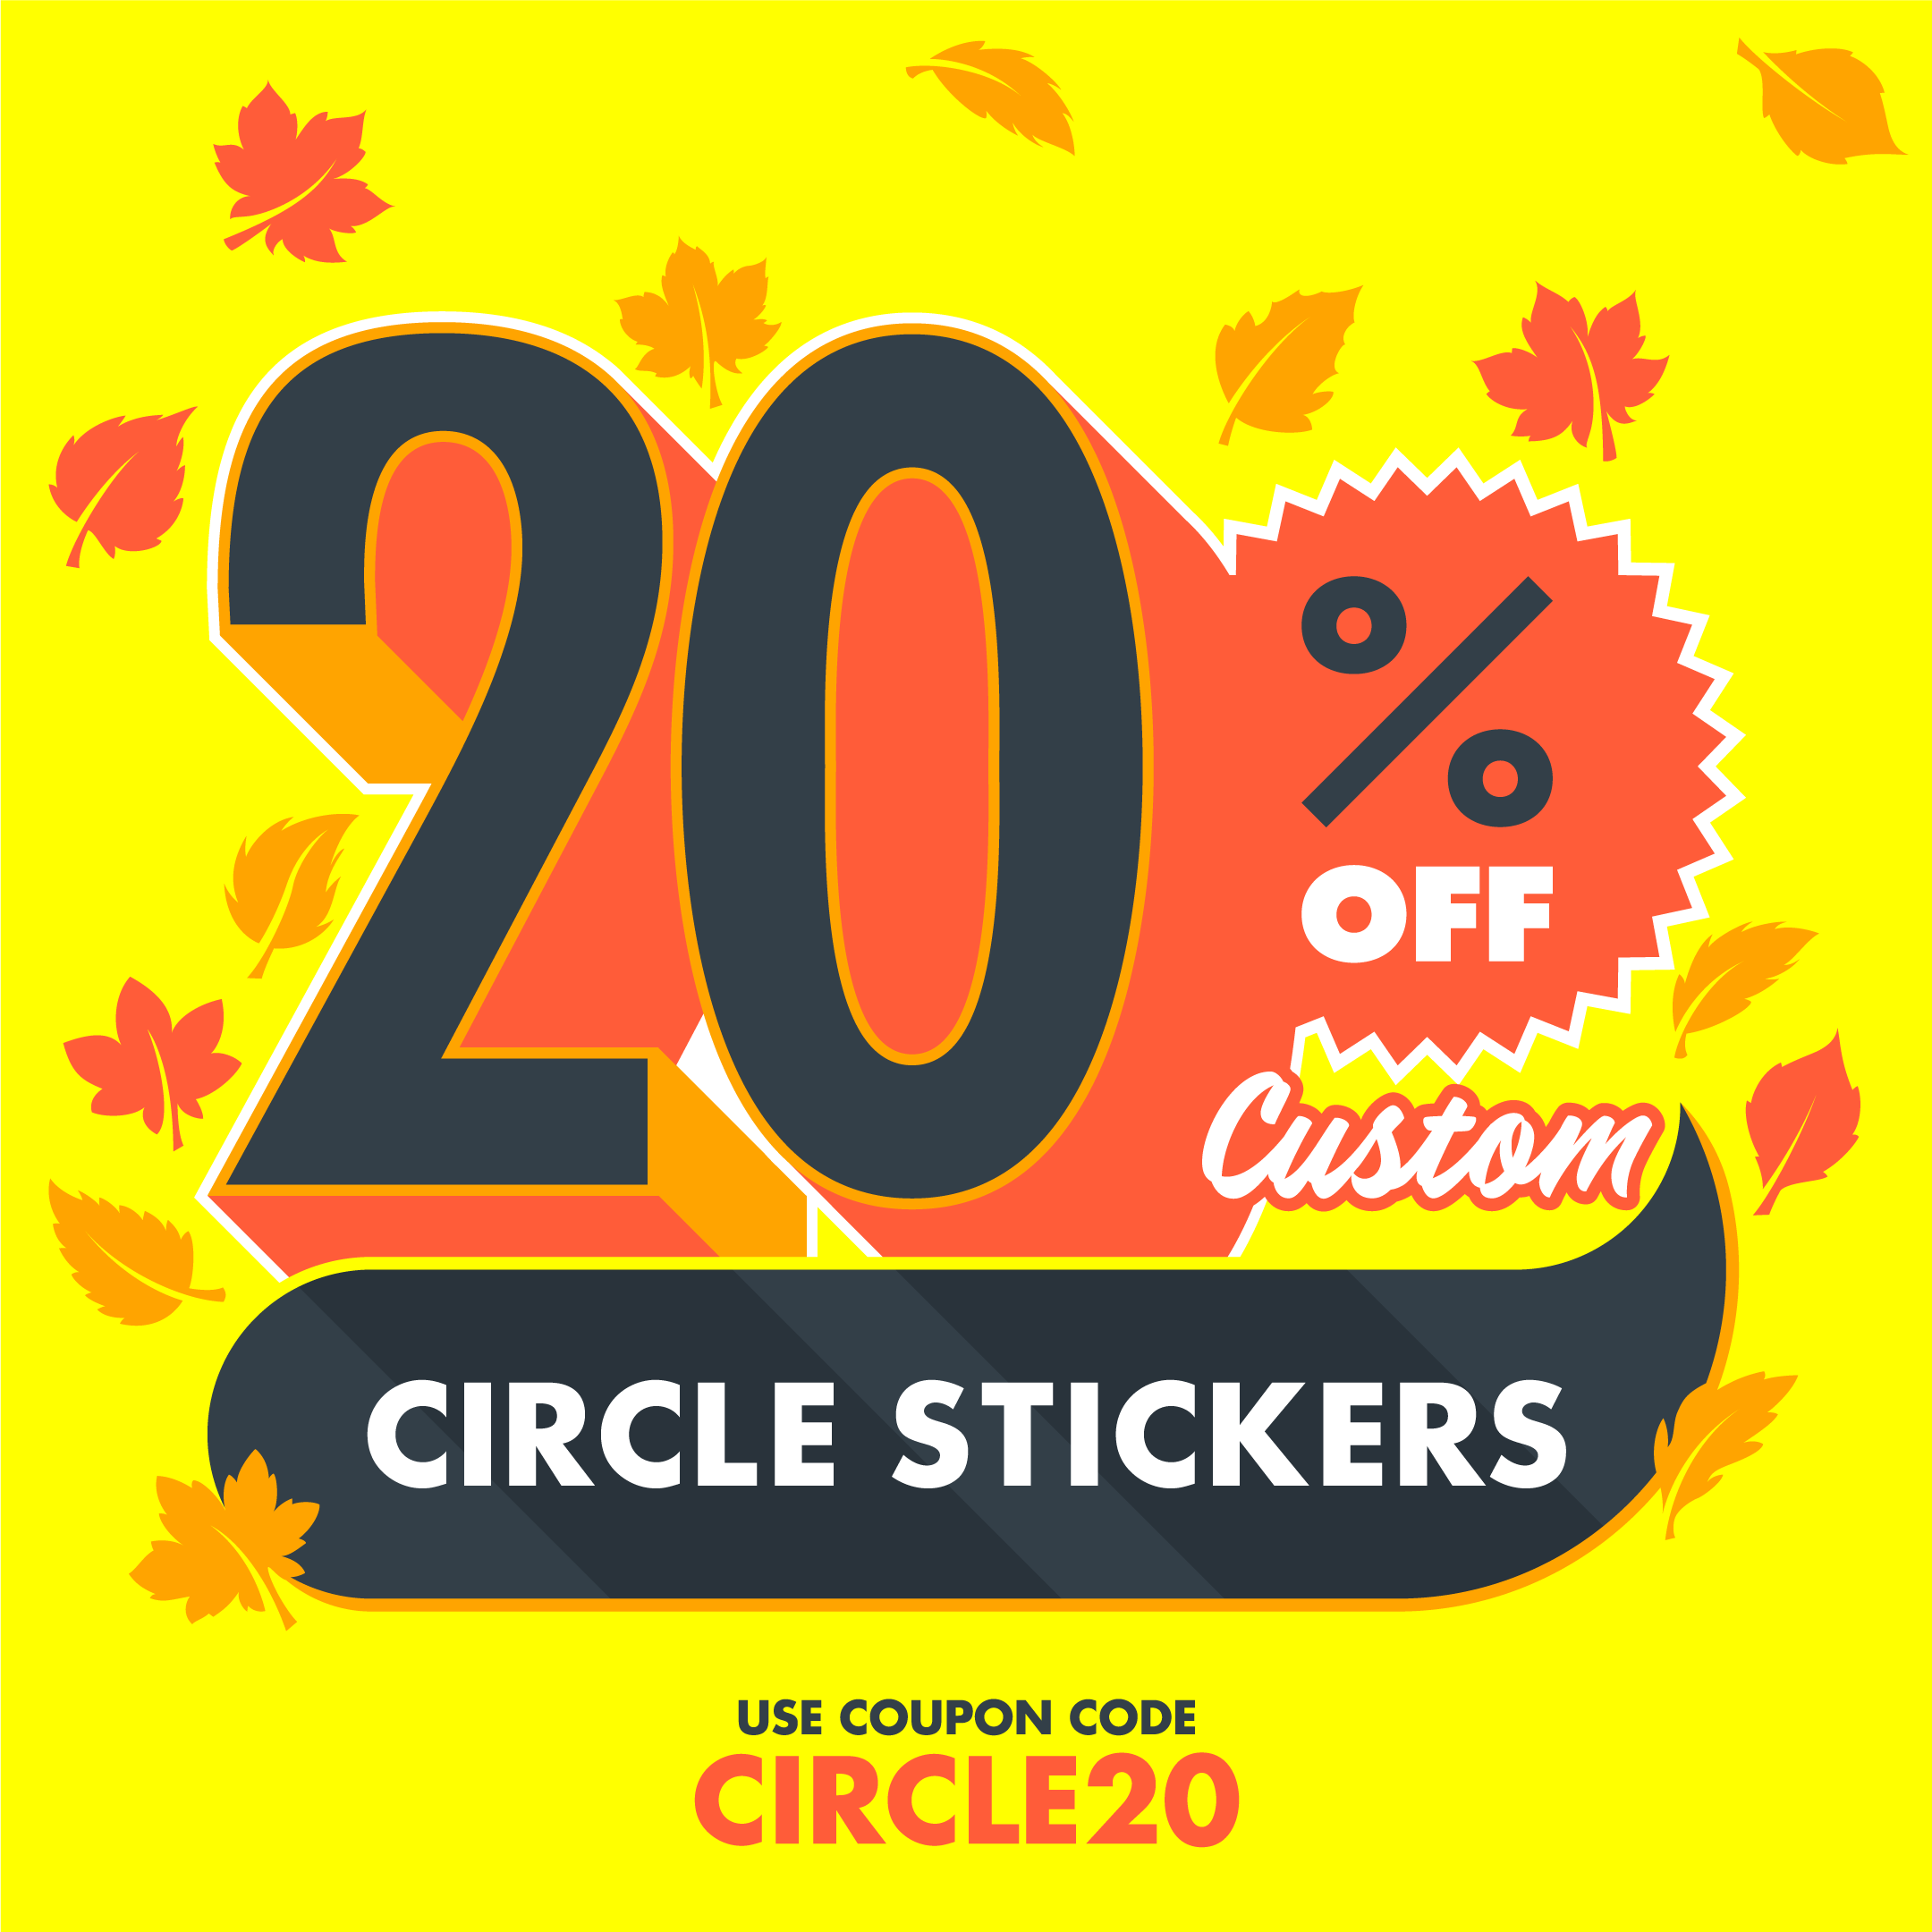 Circle Stickers 20% off with code CIRCLE20 at StandOut Stickers